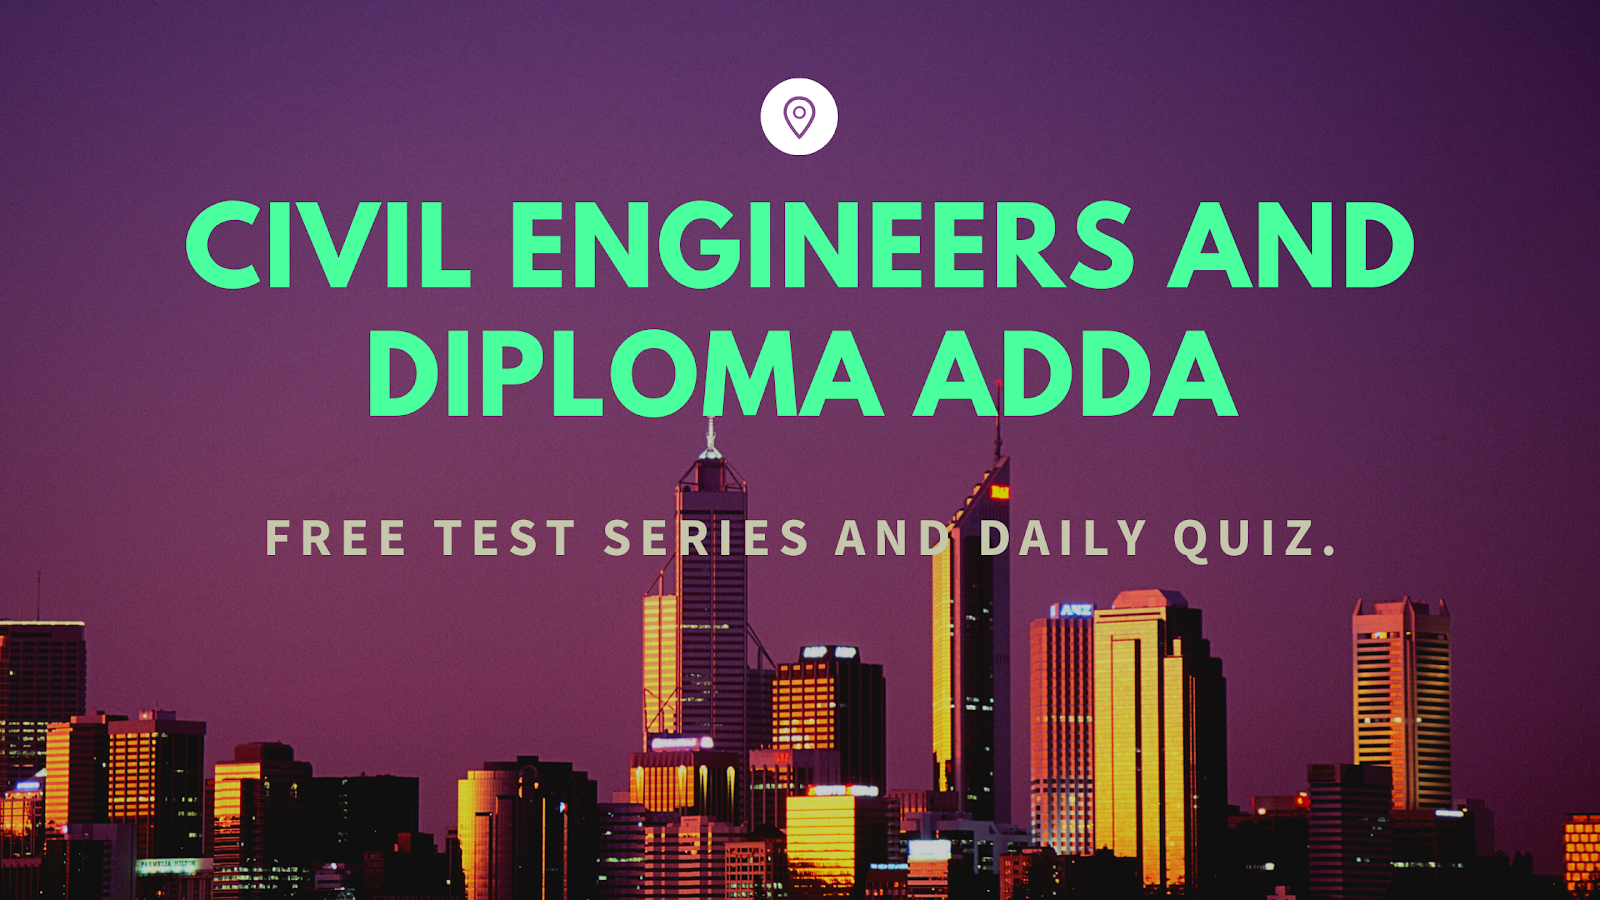 Civil Diploma Adda-Engineering Free Test series,Daily Quiz 2020 and Top General Knowledge Questions 